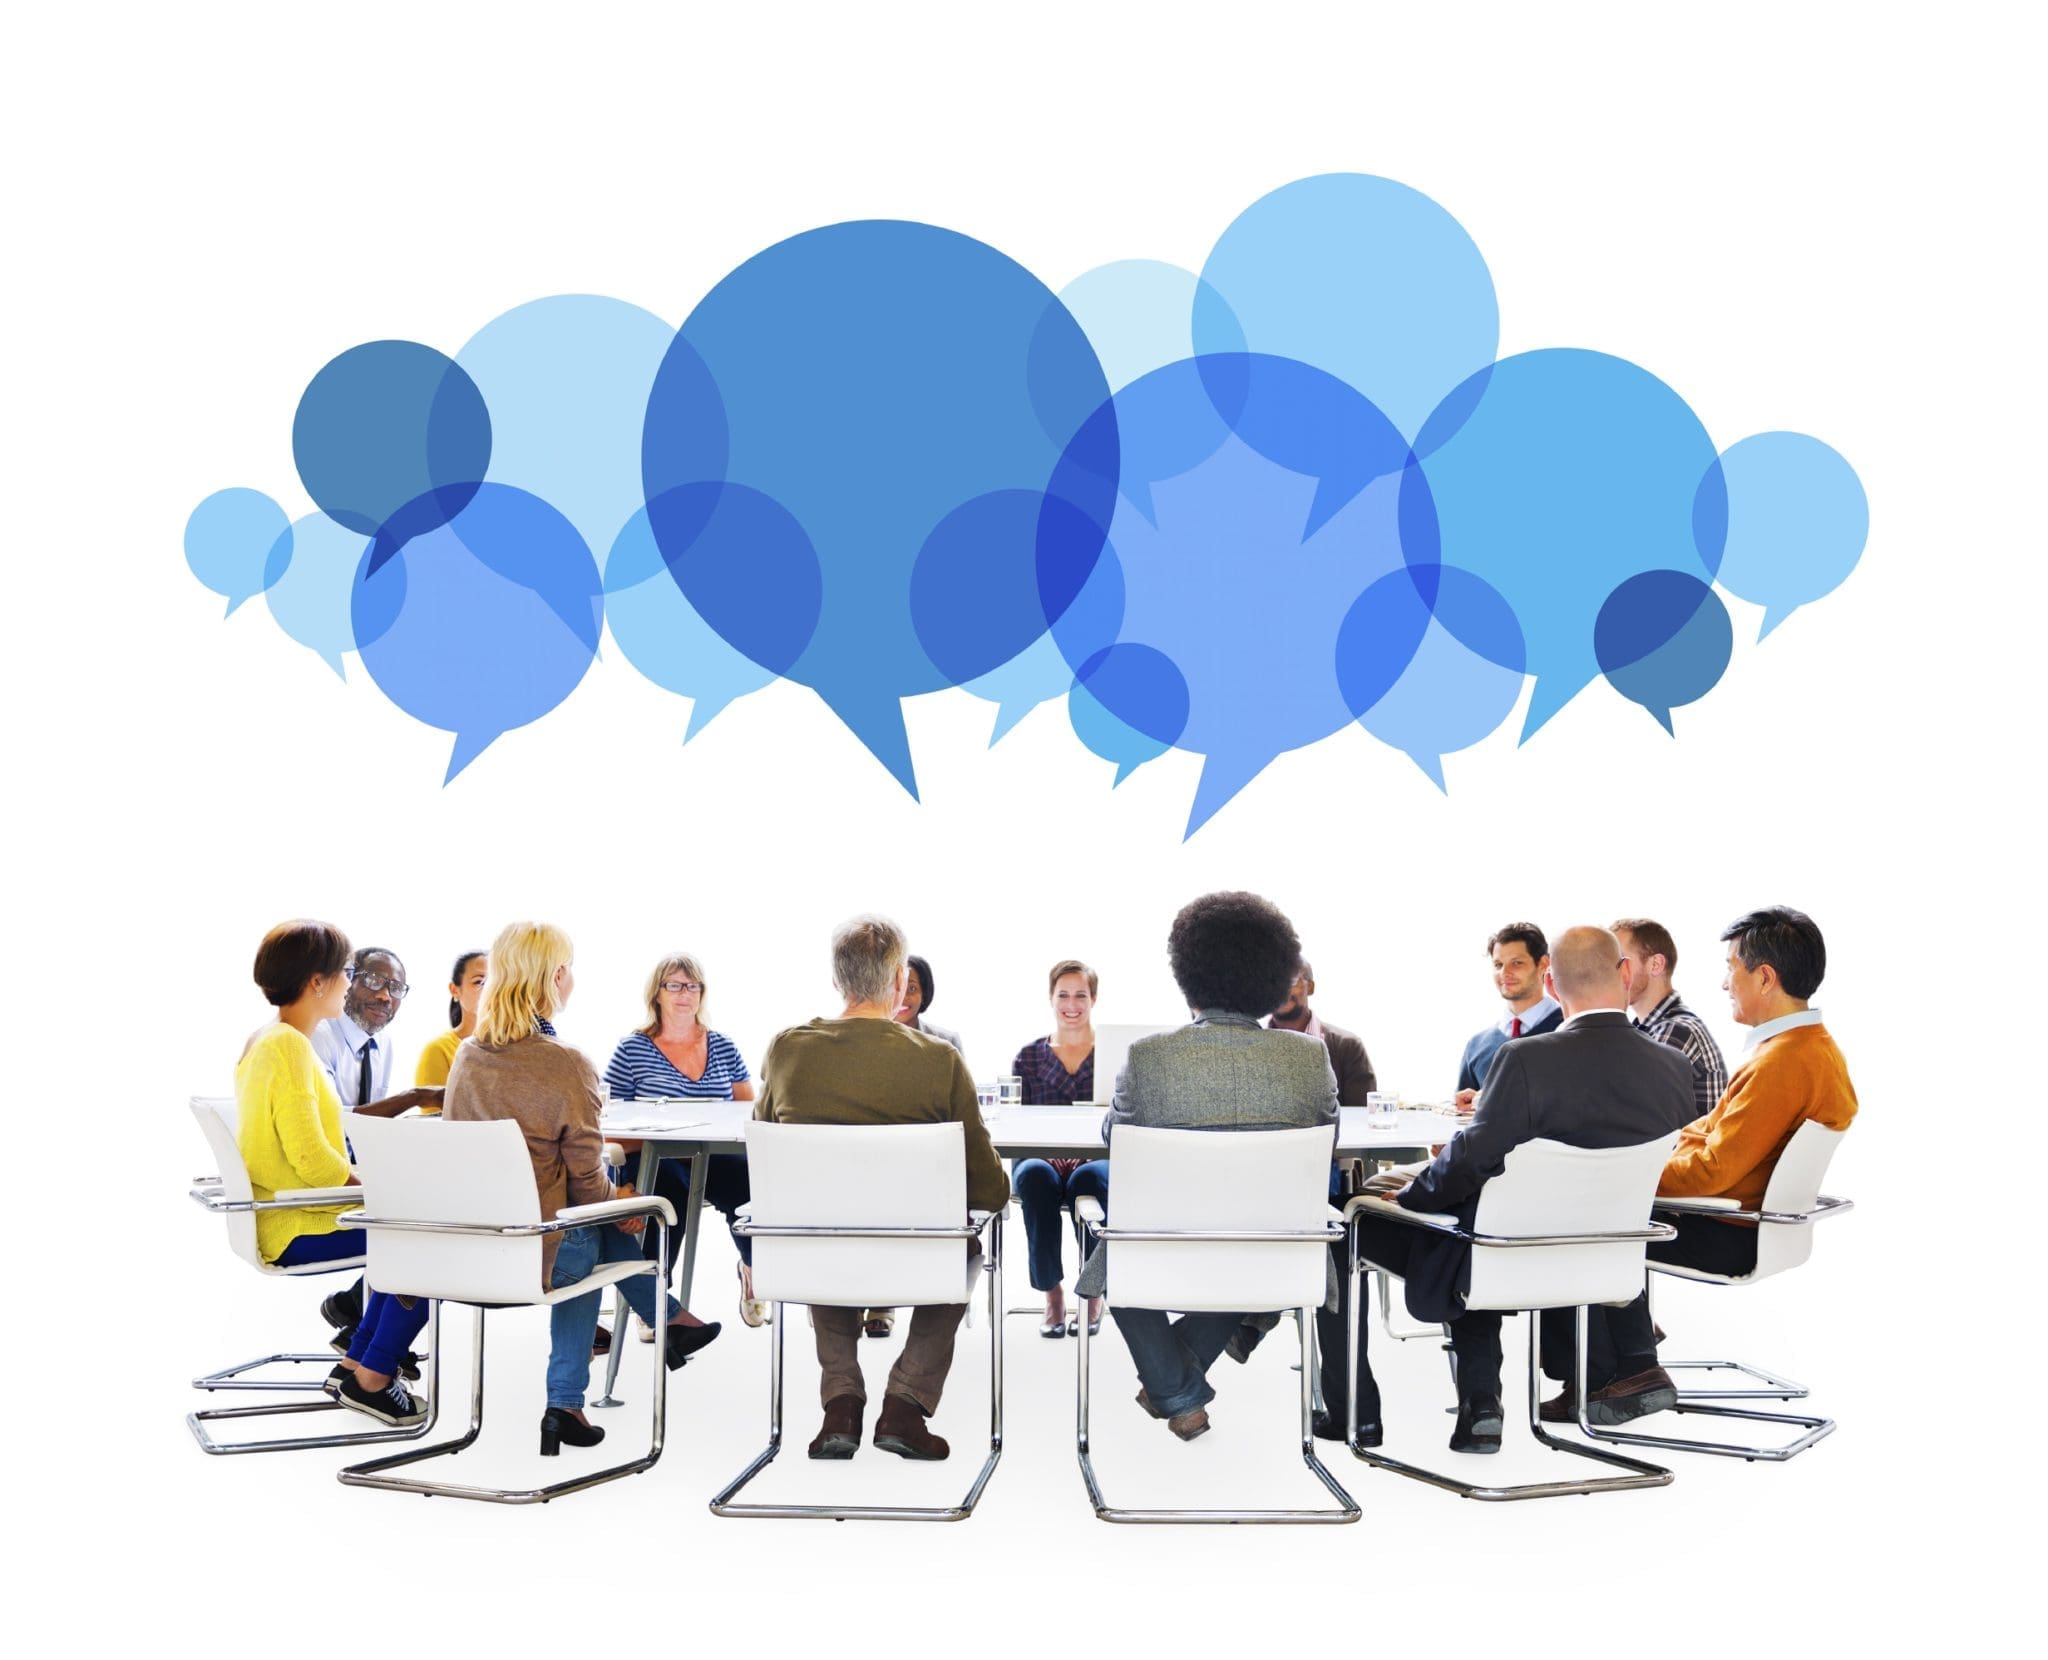 Diverse People in Meeting With Speech Bubbles